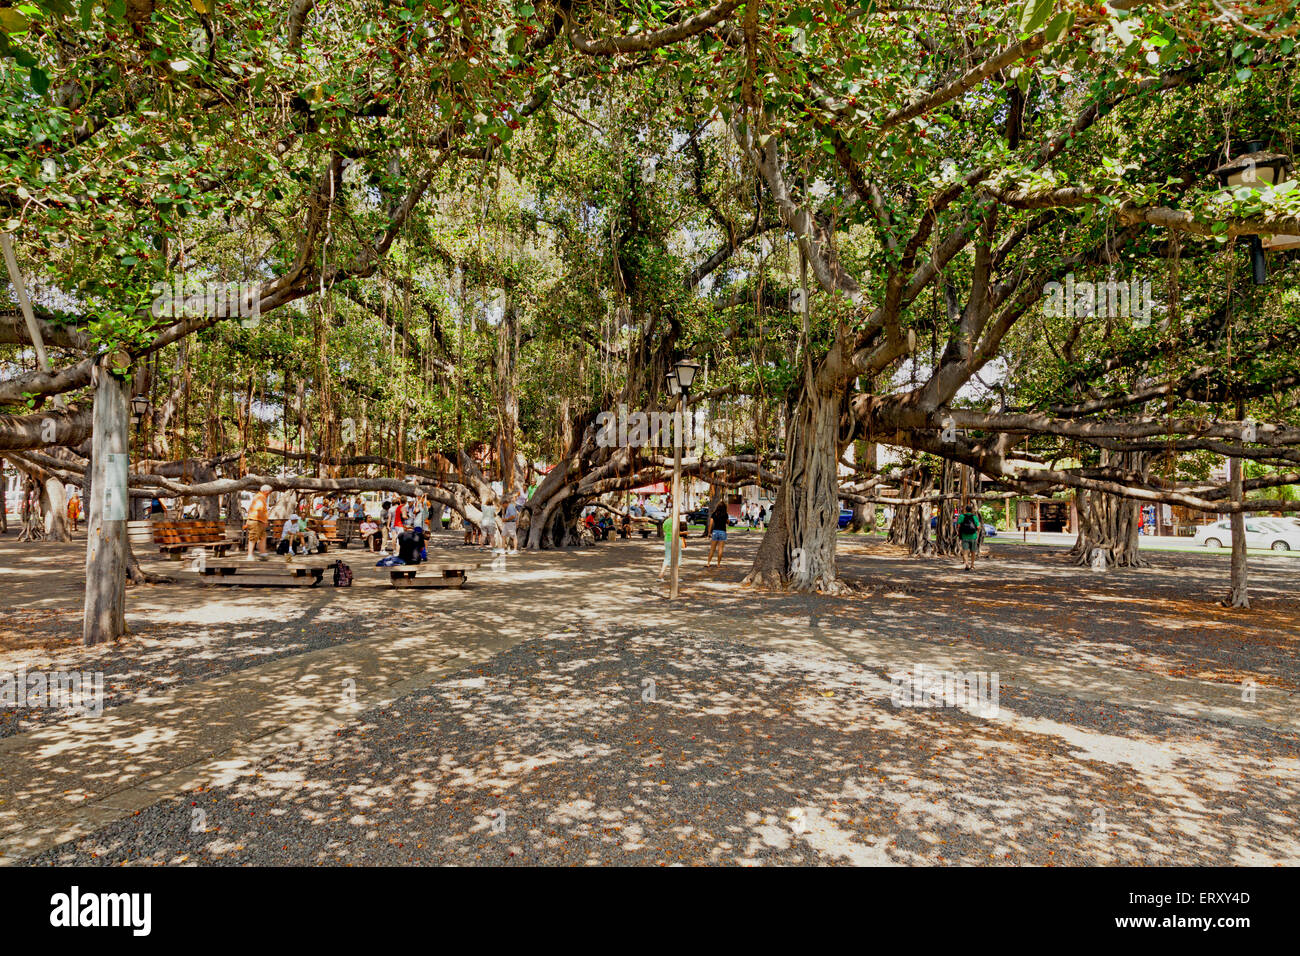 Lahaina's famed banyan tree dominates a downtown park.  This tree is the world's largest banyan. Stock Photo